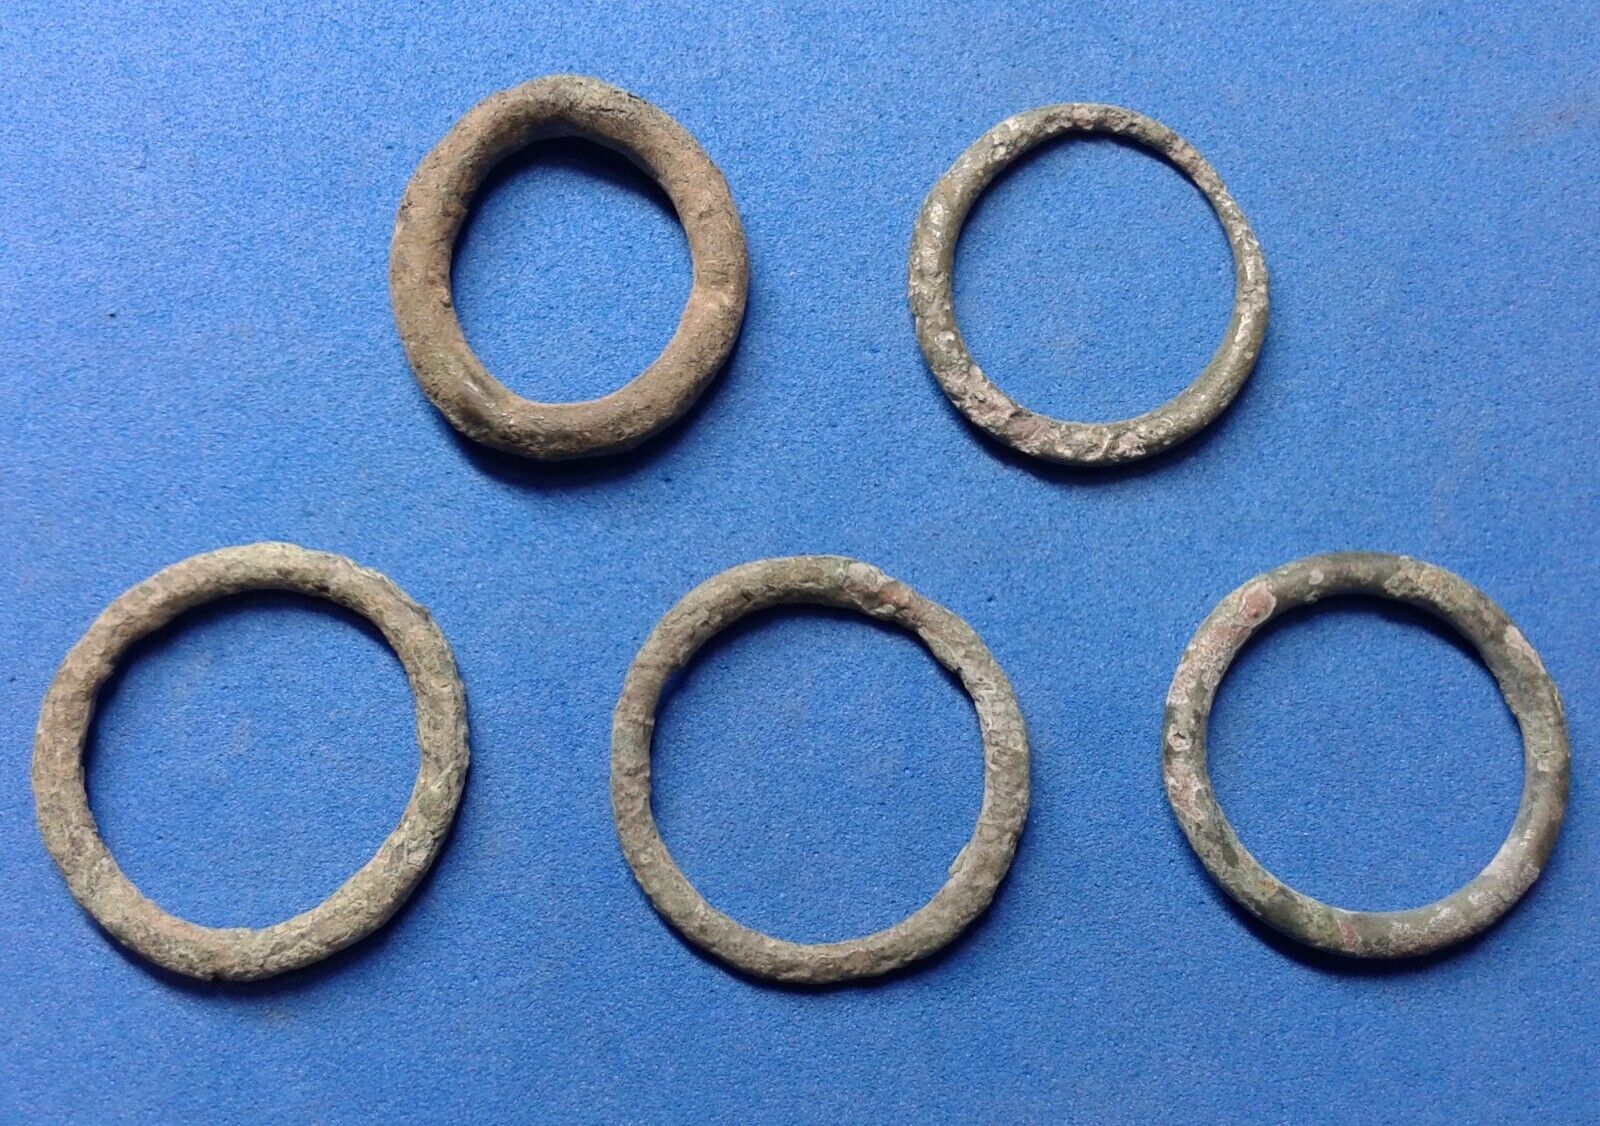 Lot Of 5 Ancient Celtic Bronze Currency Rings, Proto-Money  5th-1st cent BC.